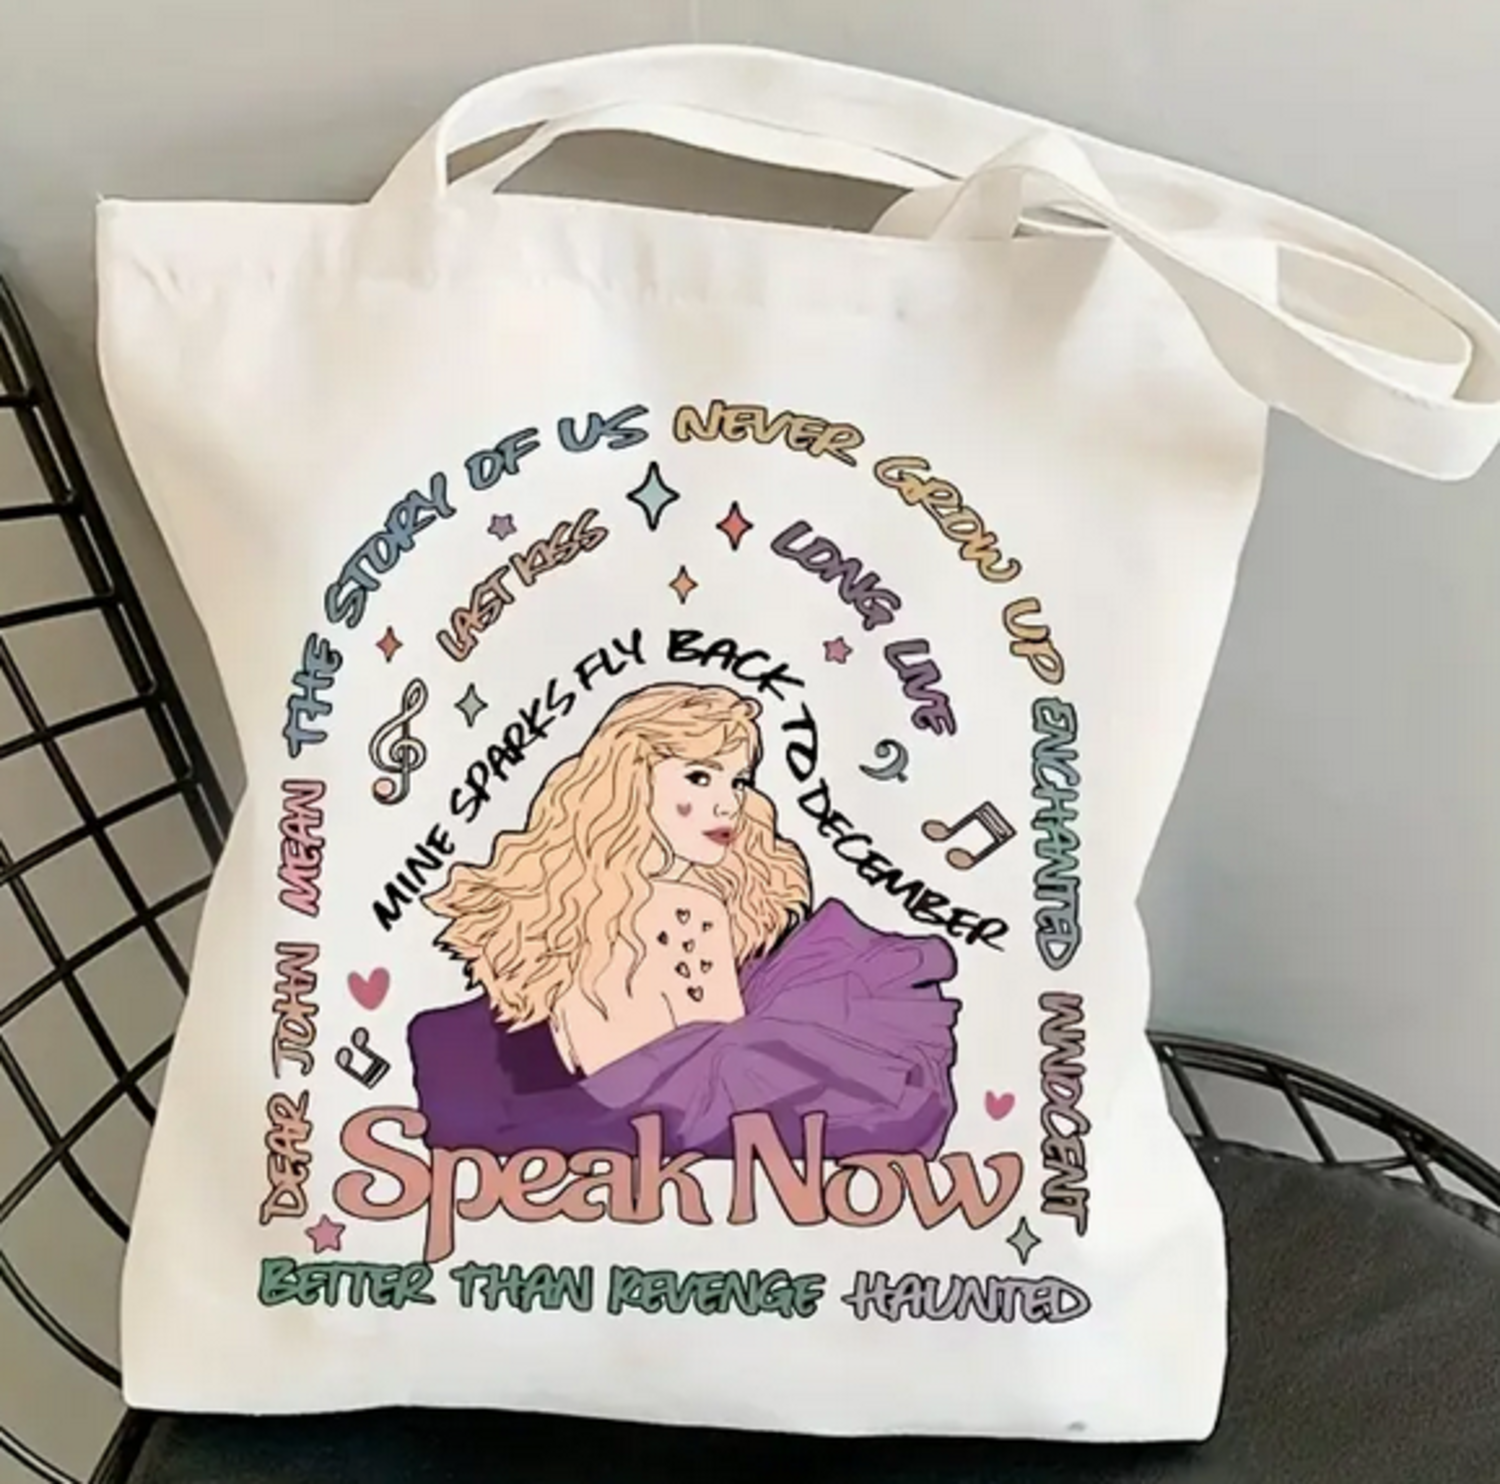 Another Fly Story Tote Bag